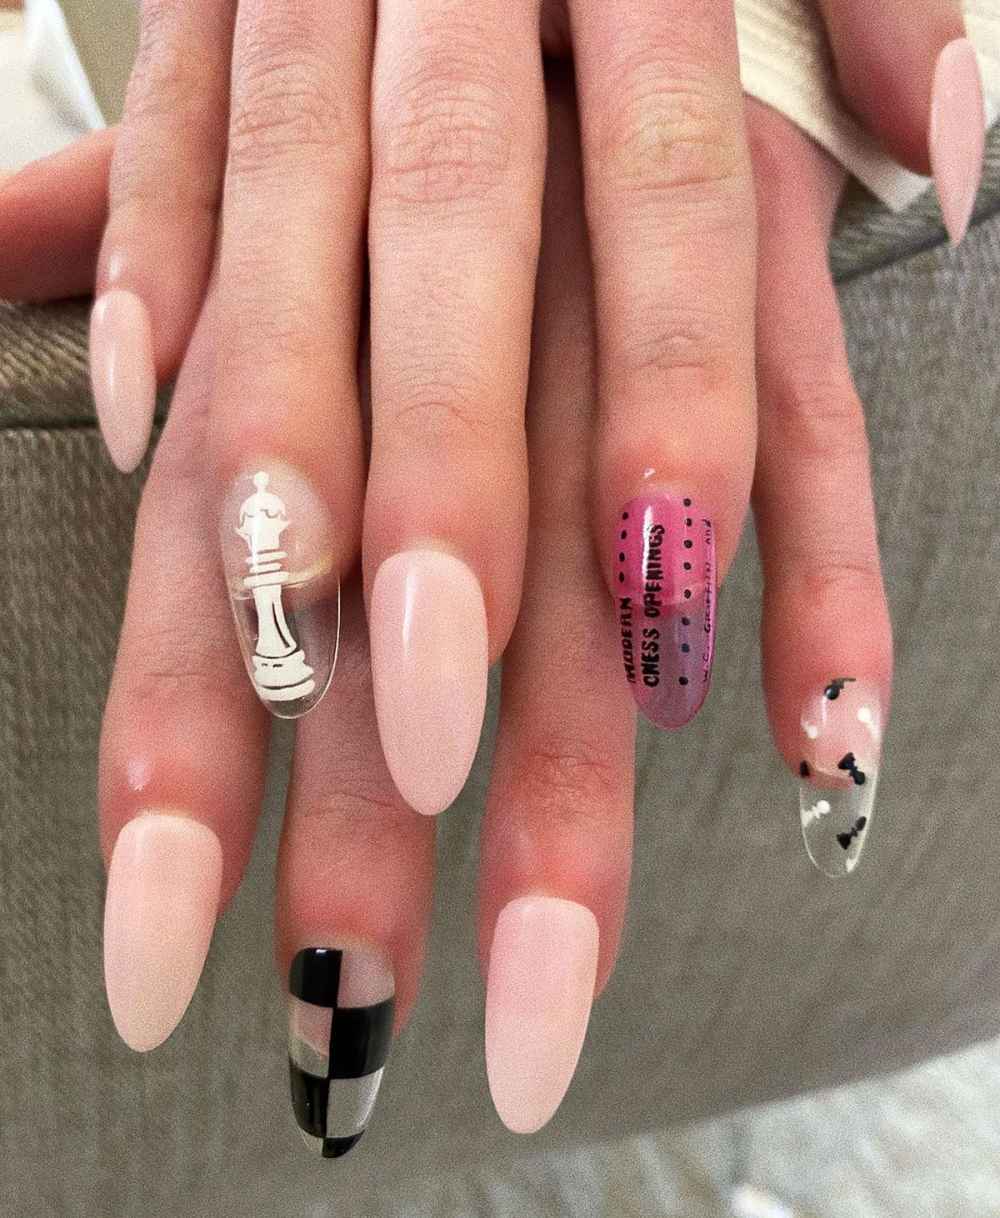 Anya Taylor-Joy Had a Queen’s Gambit Inspired Manicure at Golden Globes